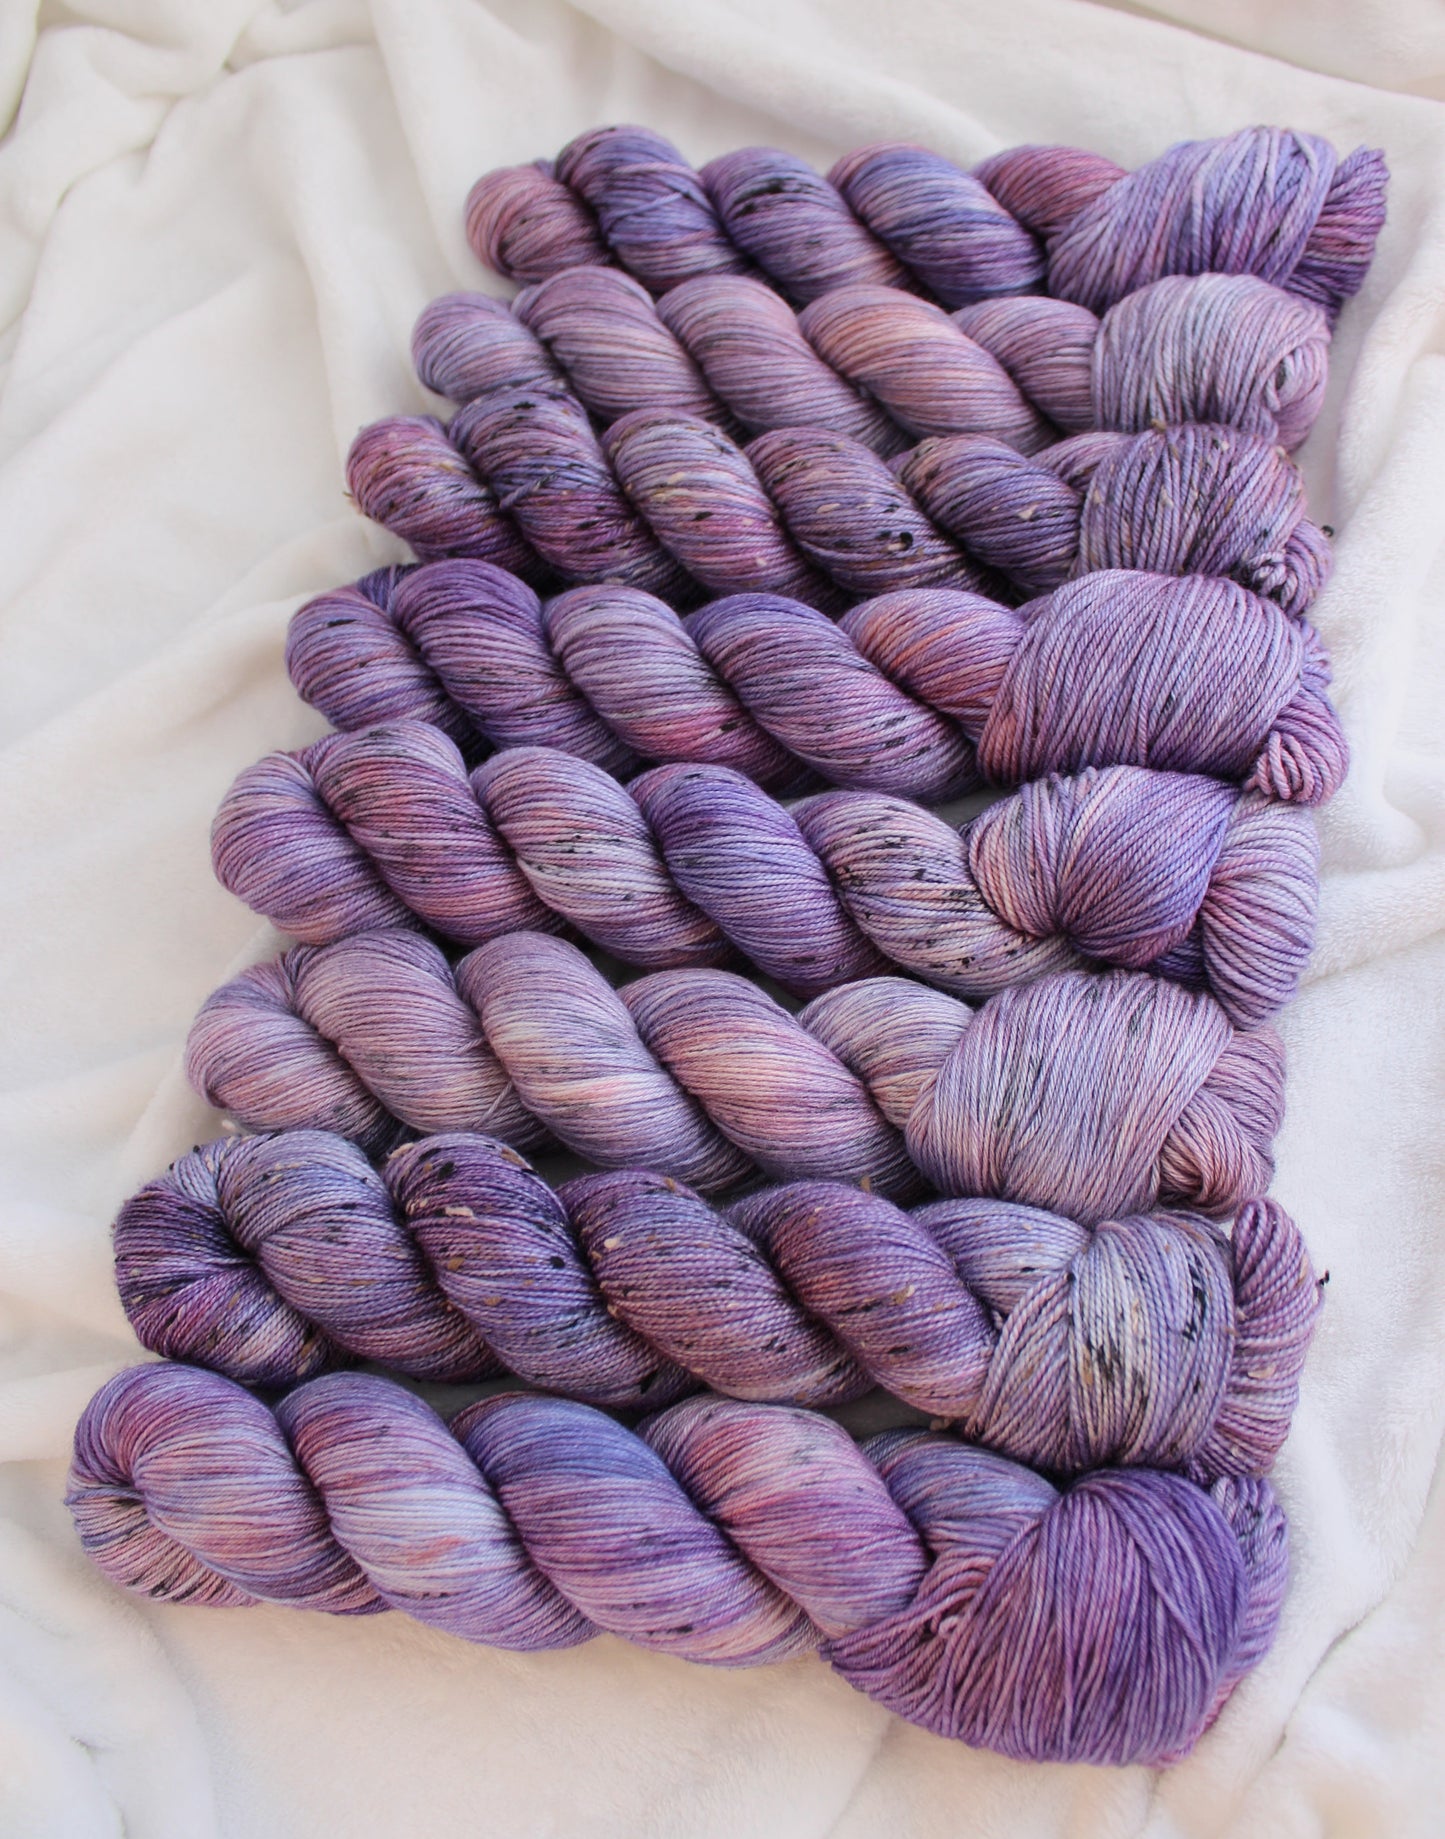 Sunset Storm - Sweater Quantity (multiples of 3)